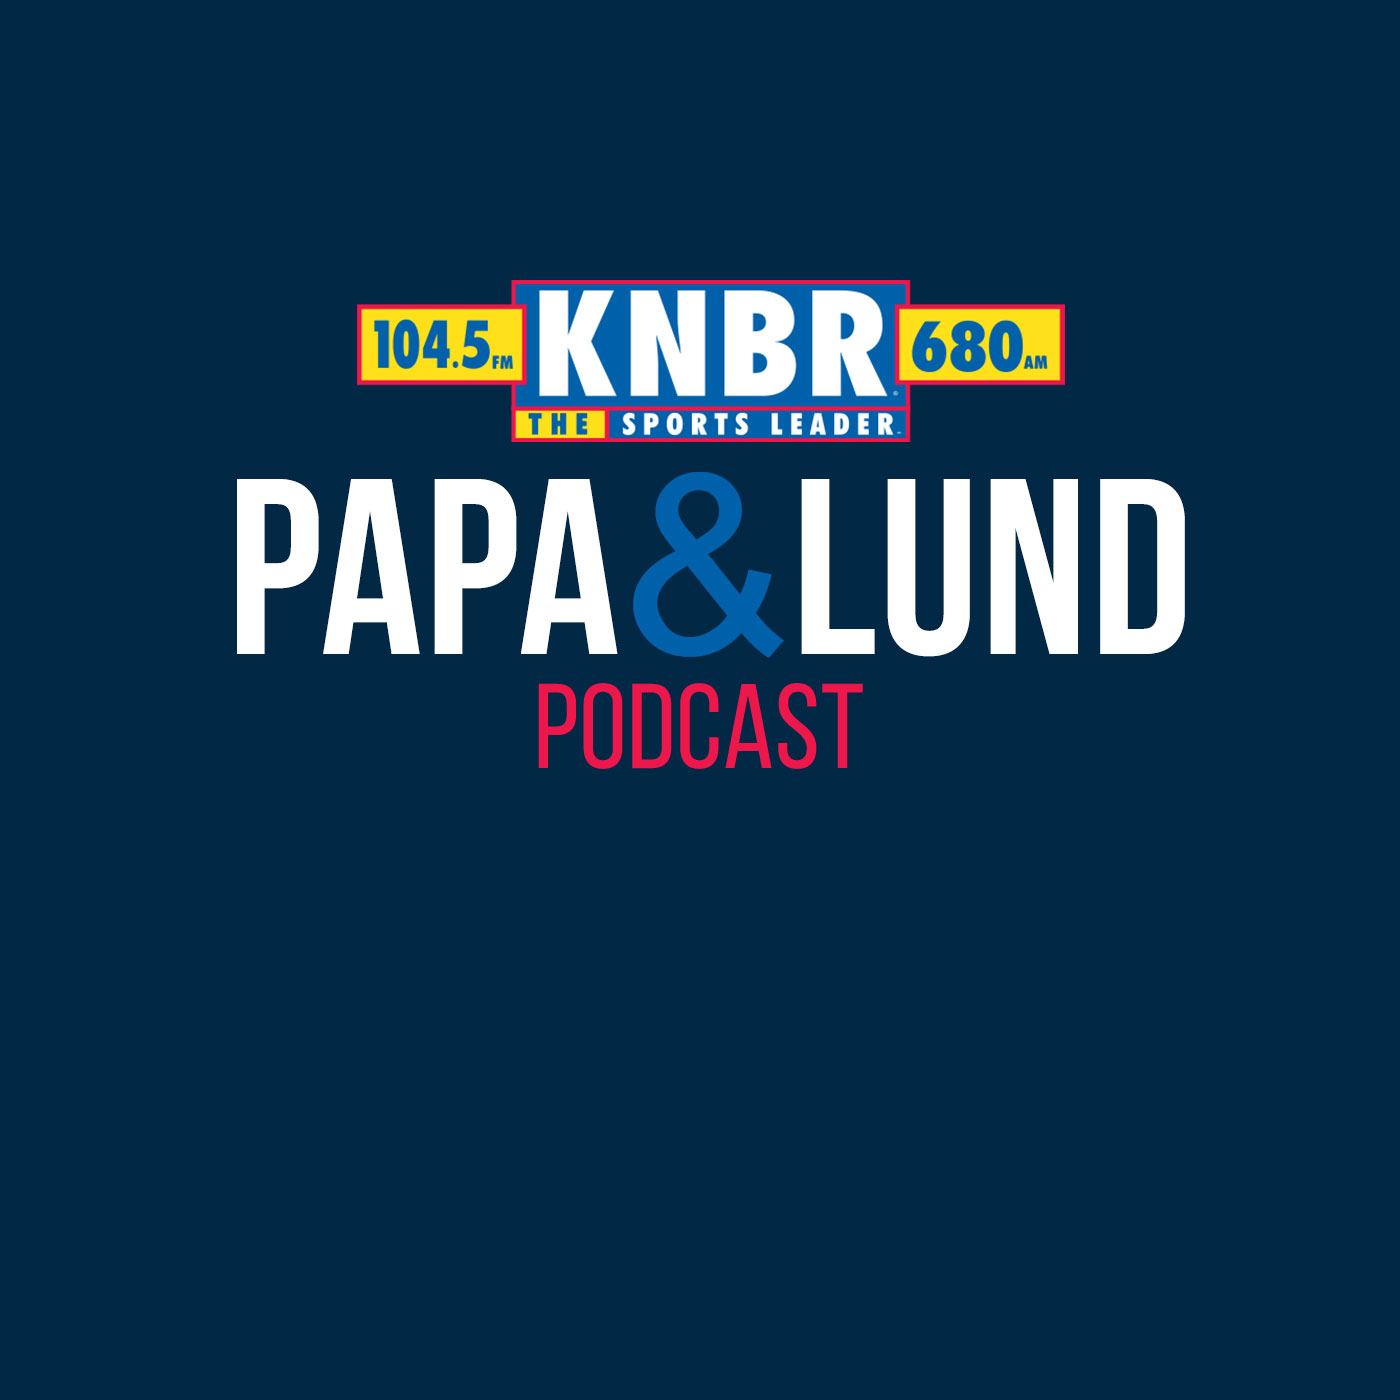 1-7 Marcell Harris talks with Papa & Lund about his transition to playing Linebacker and how the 49ers position group pride themselves on being the best in the league